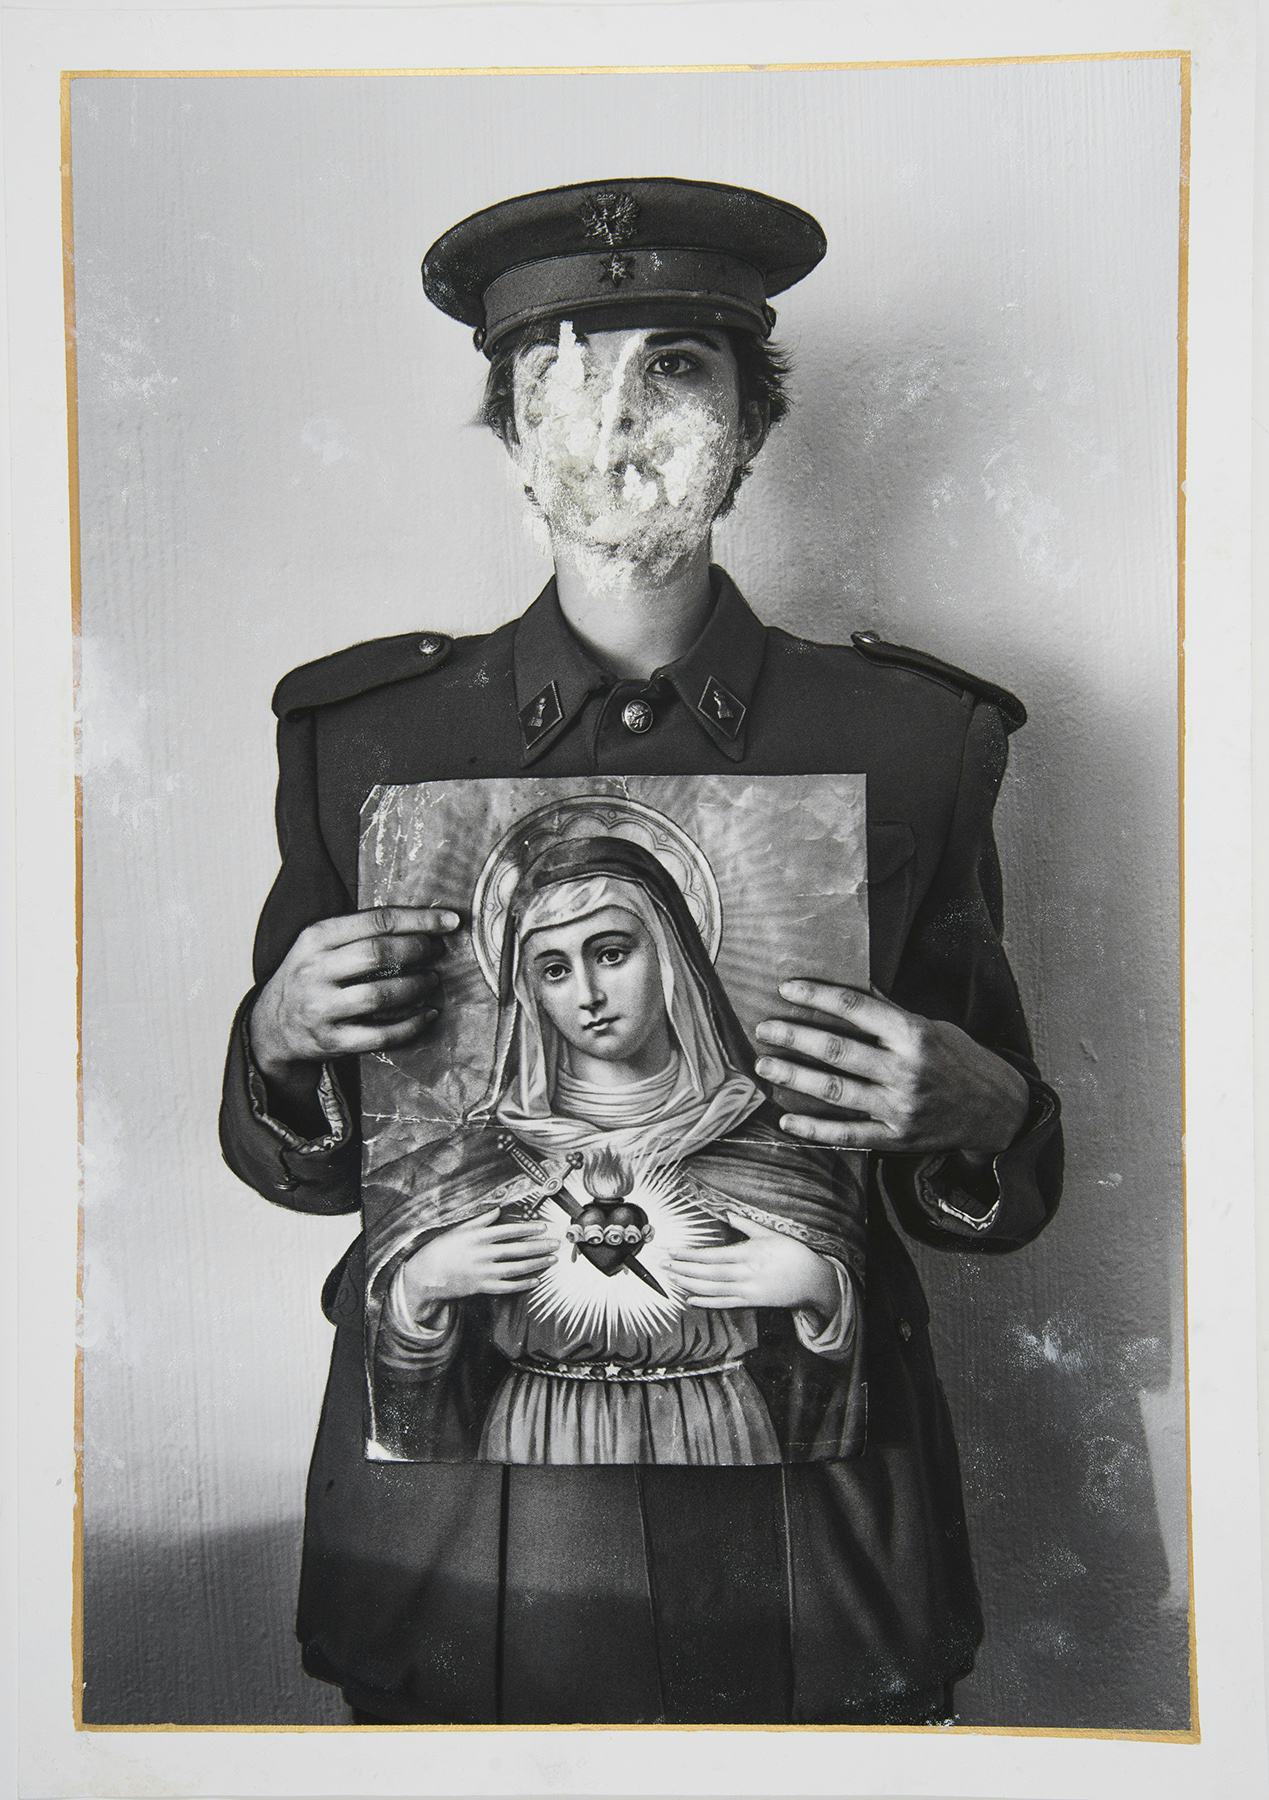 Black and white photo of an unknown soldier dressed in post-Civil War uniform holding a virgin portrait. © Lucia Higuera